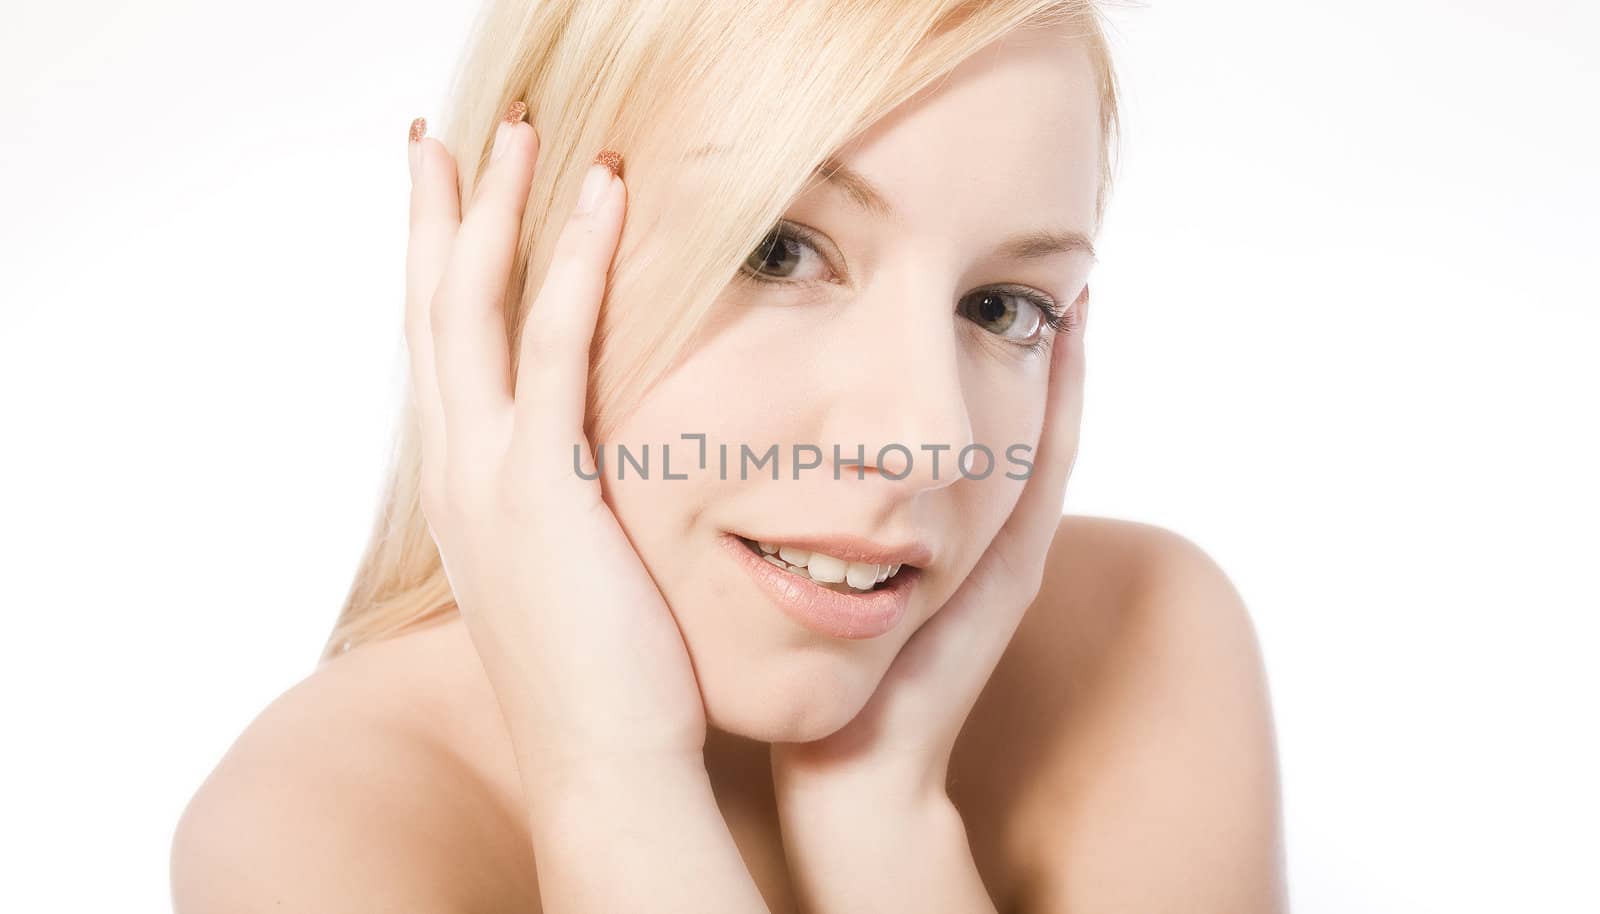 Studio portrait of a young blond woman looking cute